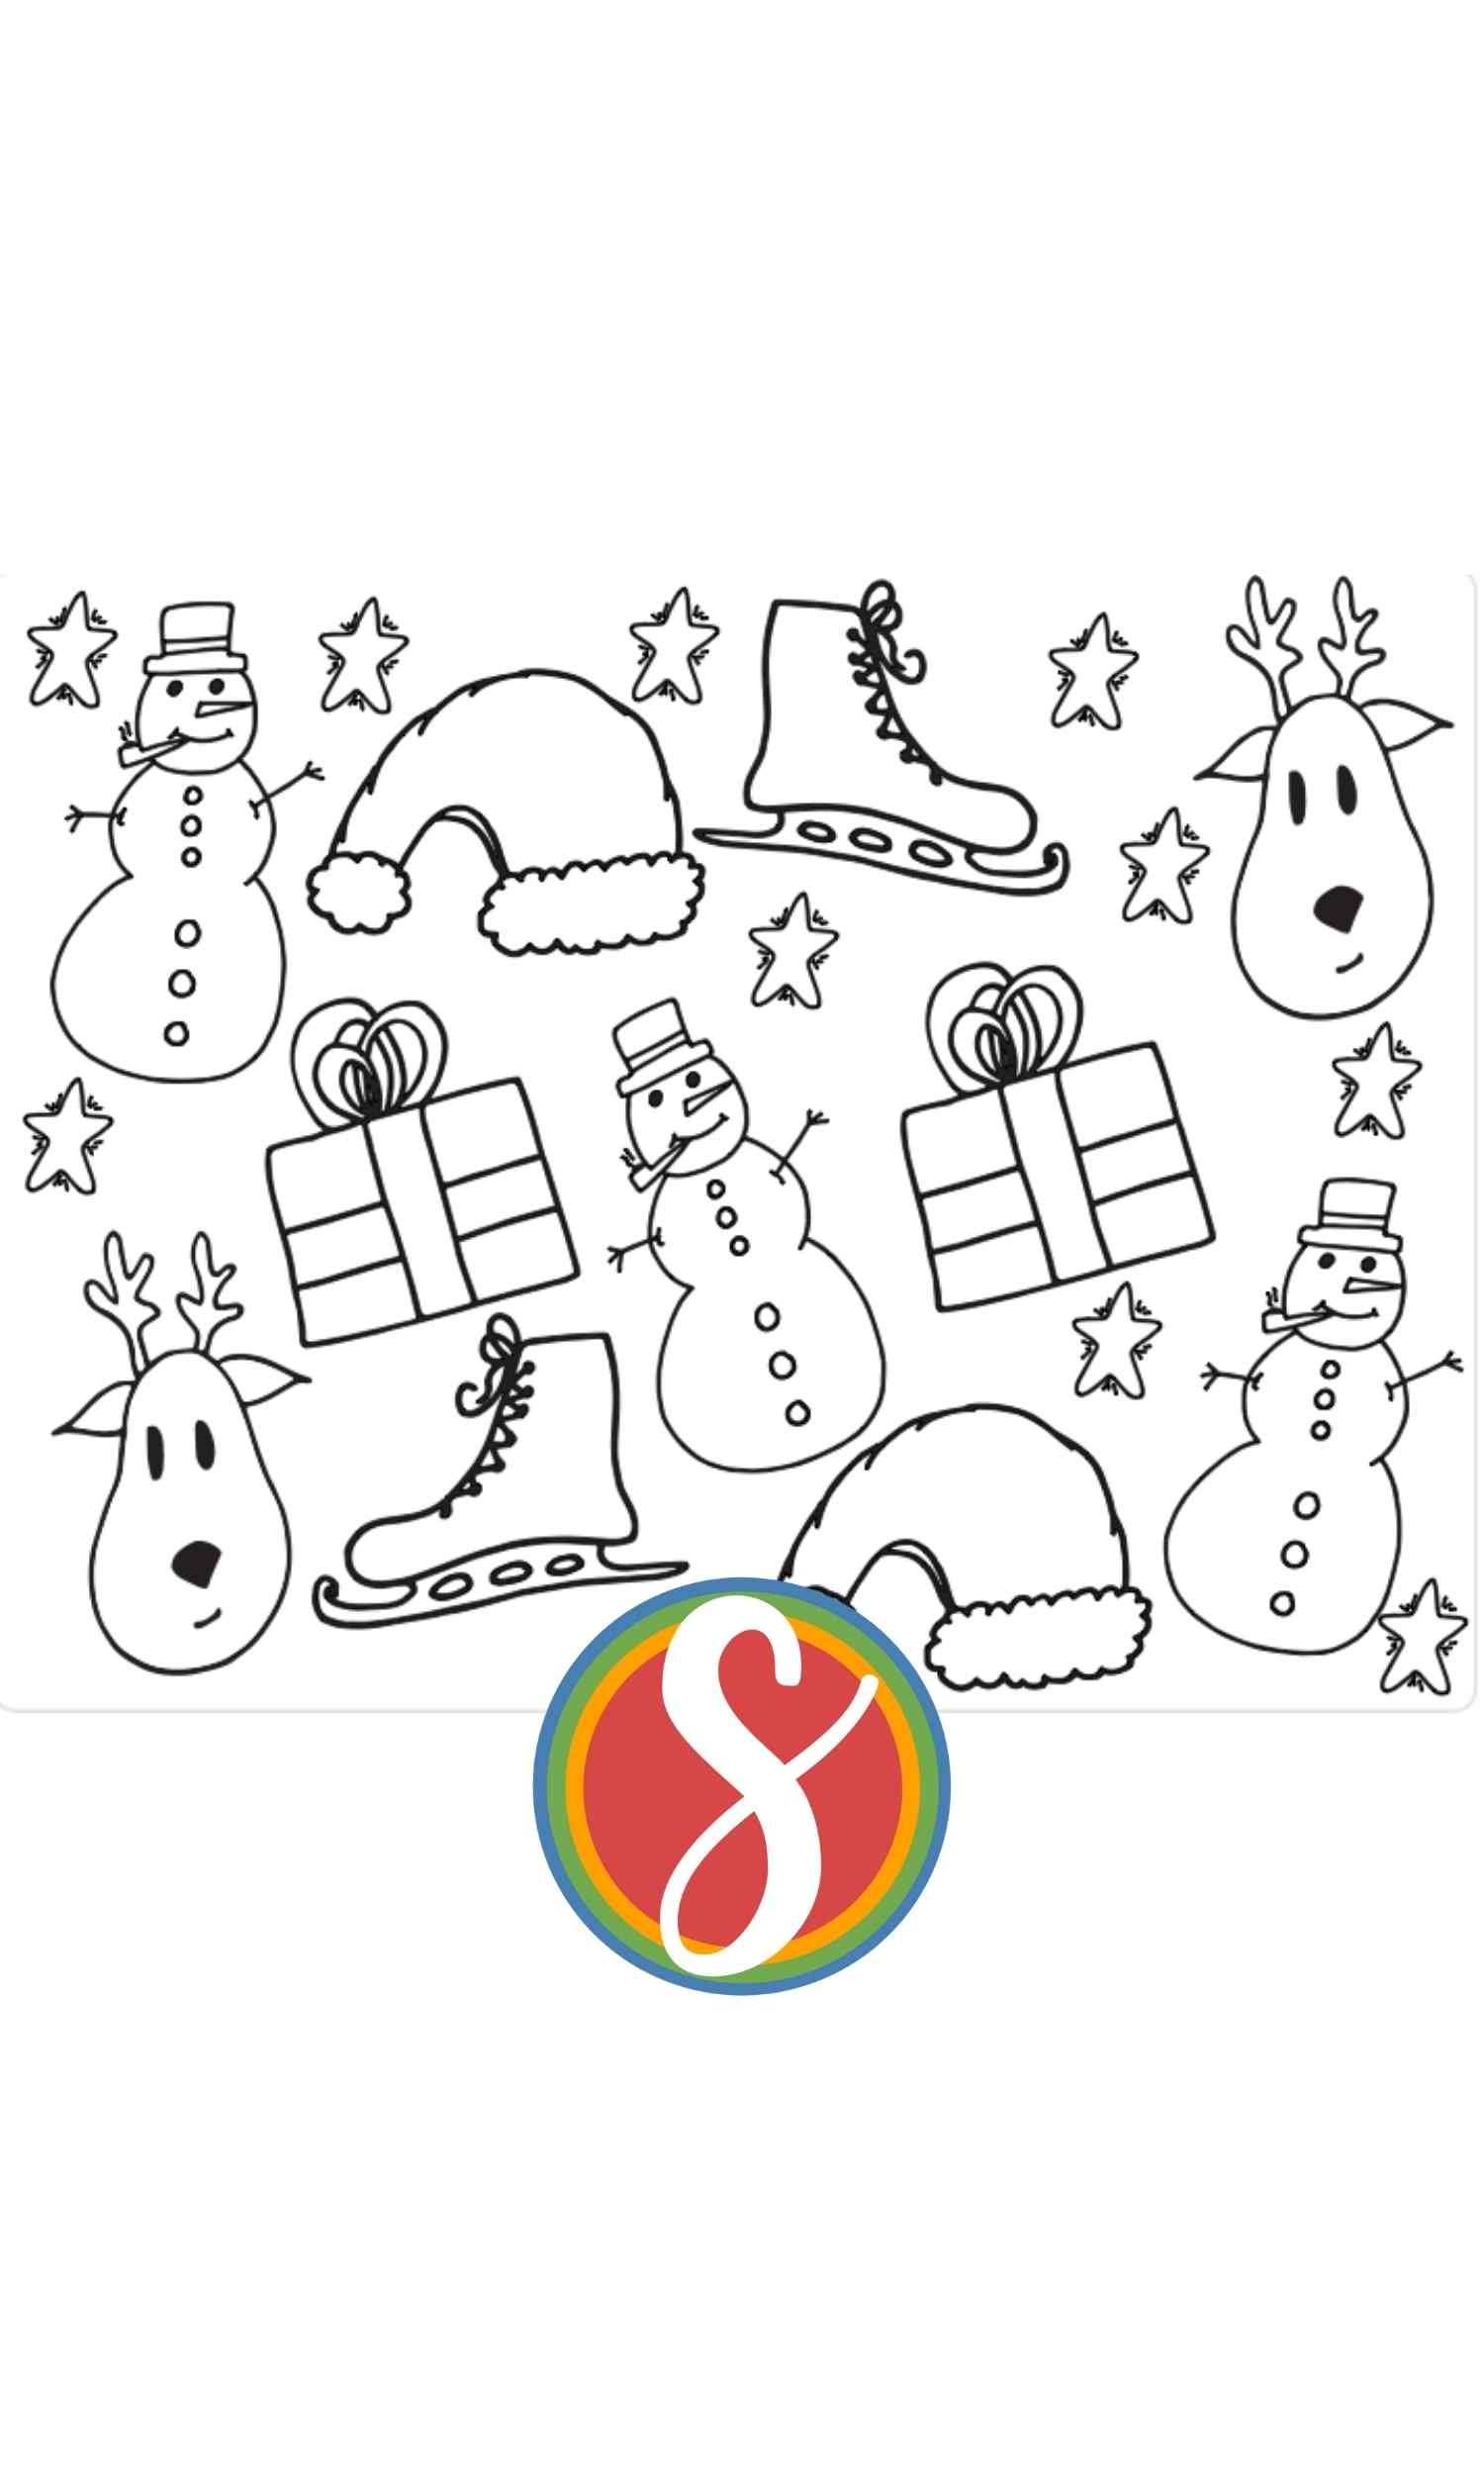 colorable images of snowmen, santa hats, ice skates, reindeer, gifts, and stars